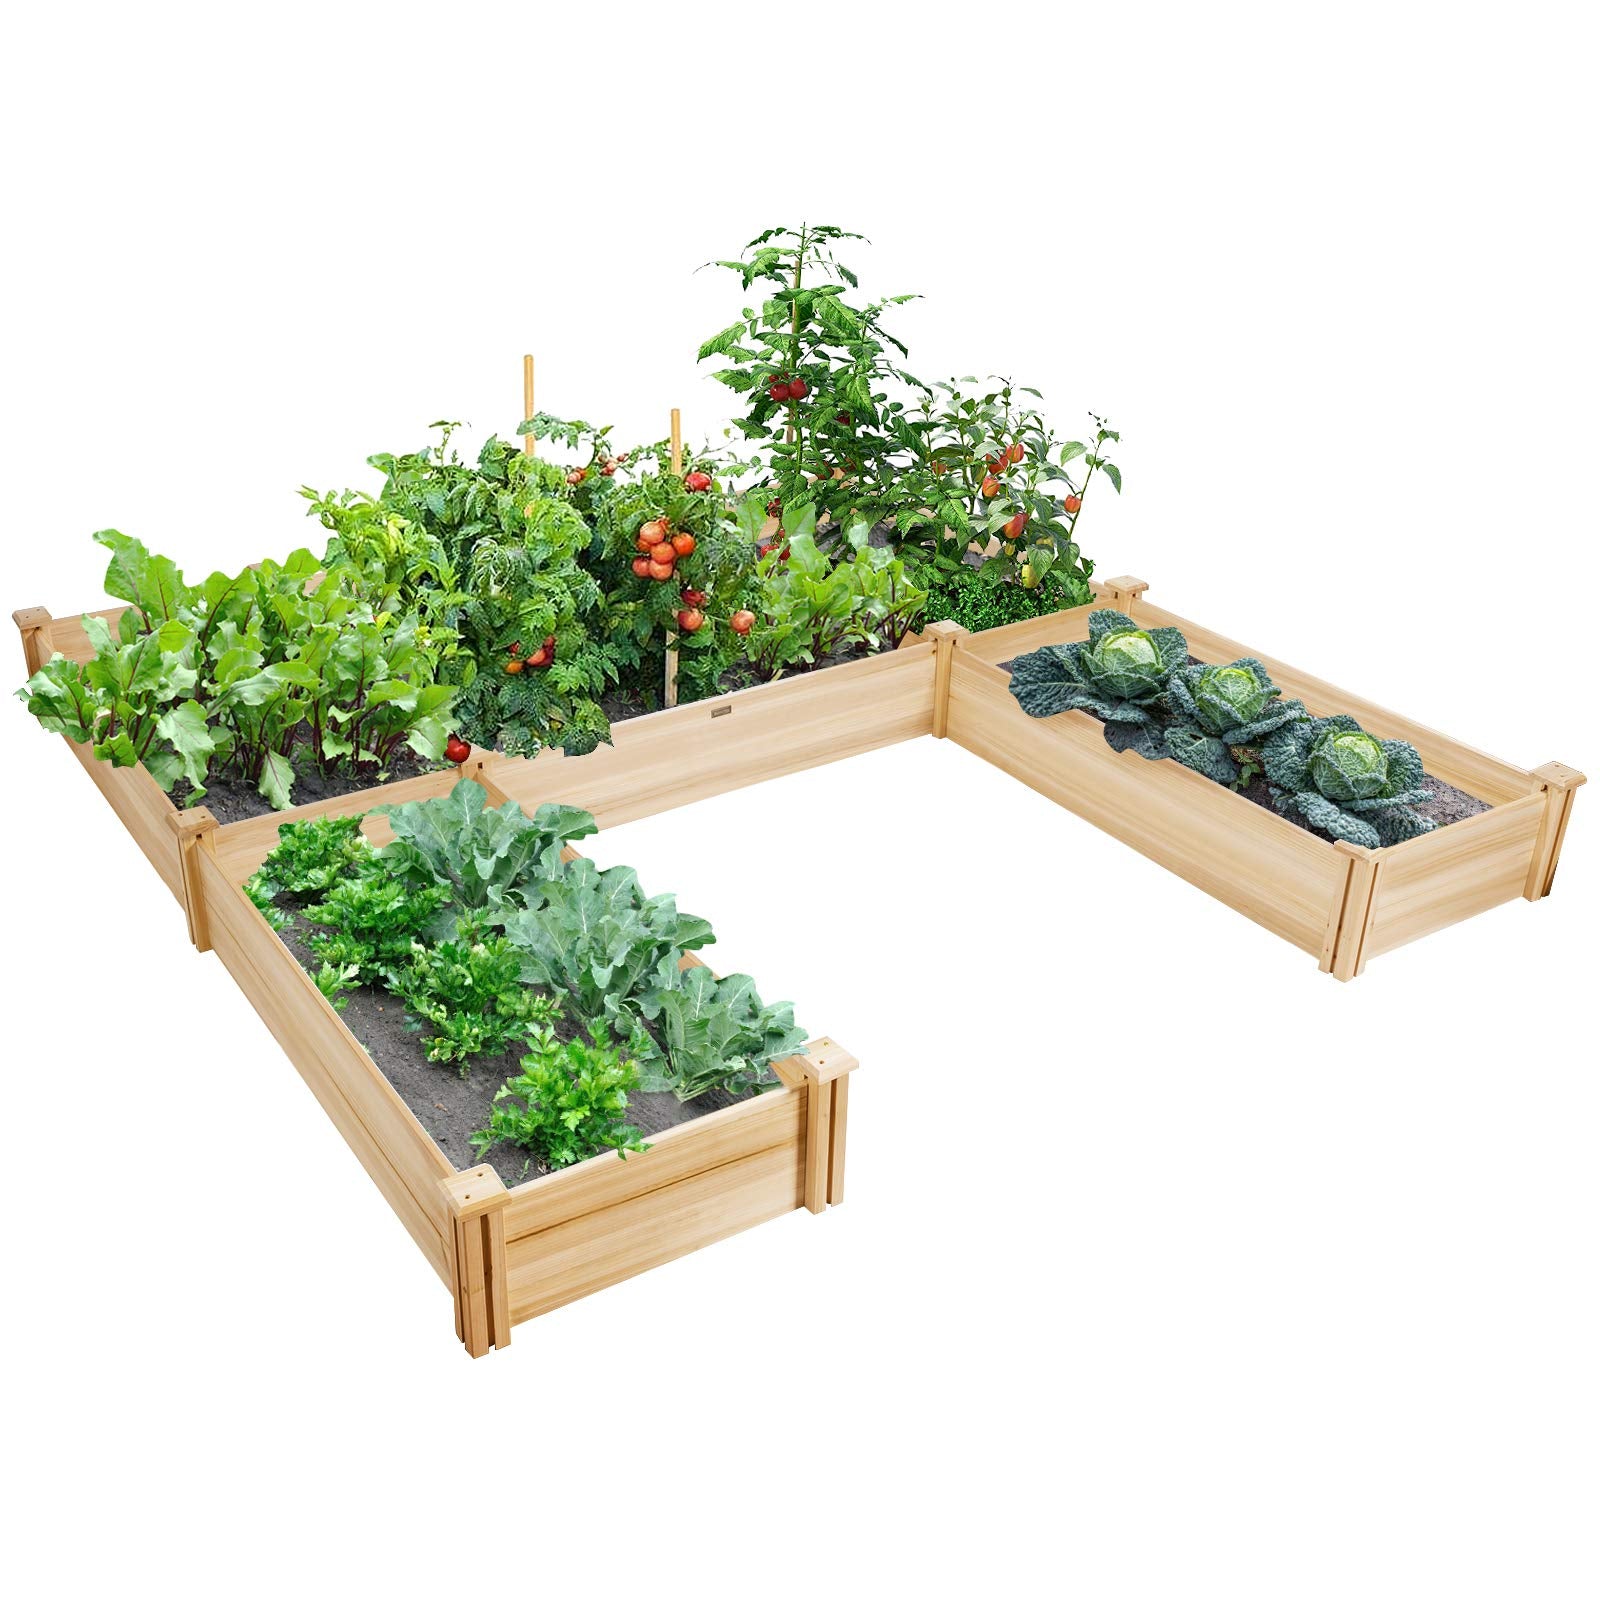 Giantex U-Shaped Raised Garden Bed, Wood Raised Garden Planter Box for Vegetables and Flowers, Easy Assembly, Garden Container for Backyard, Patio, Balcony (92.5